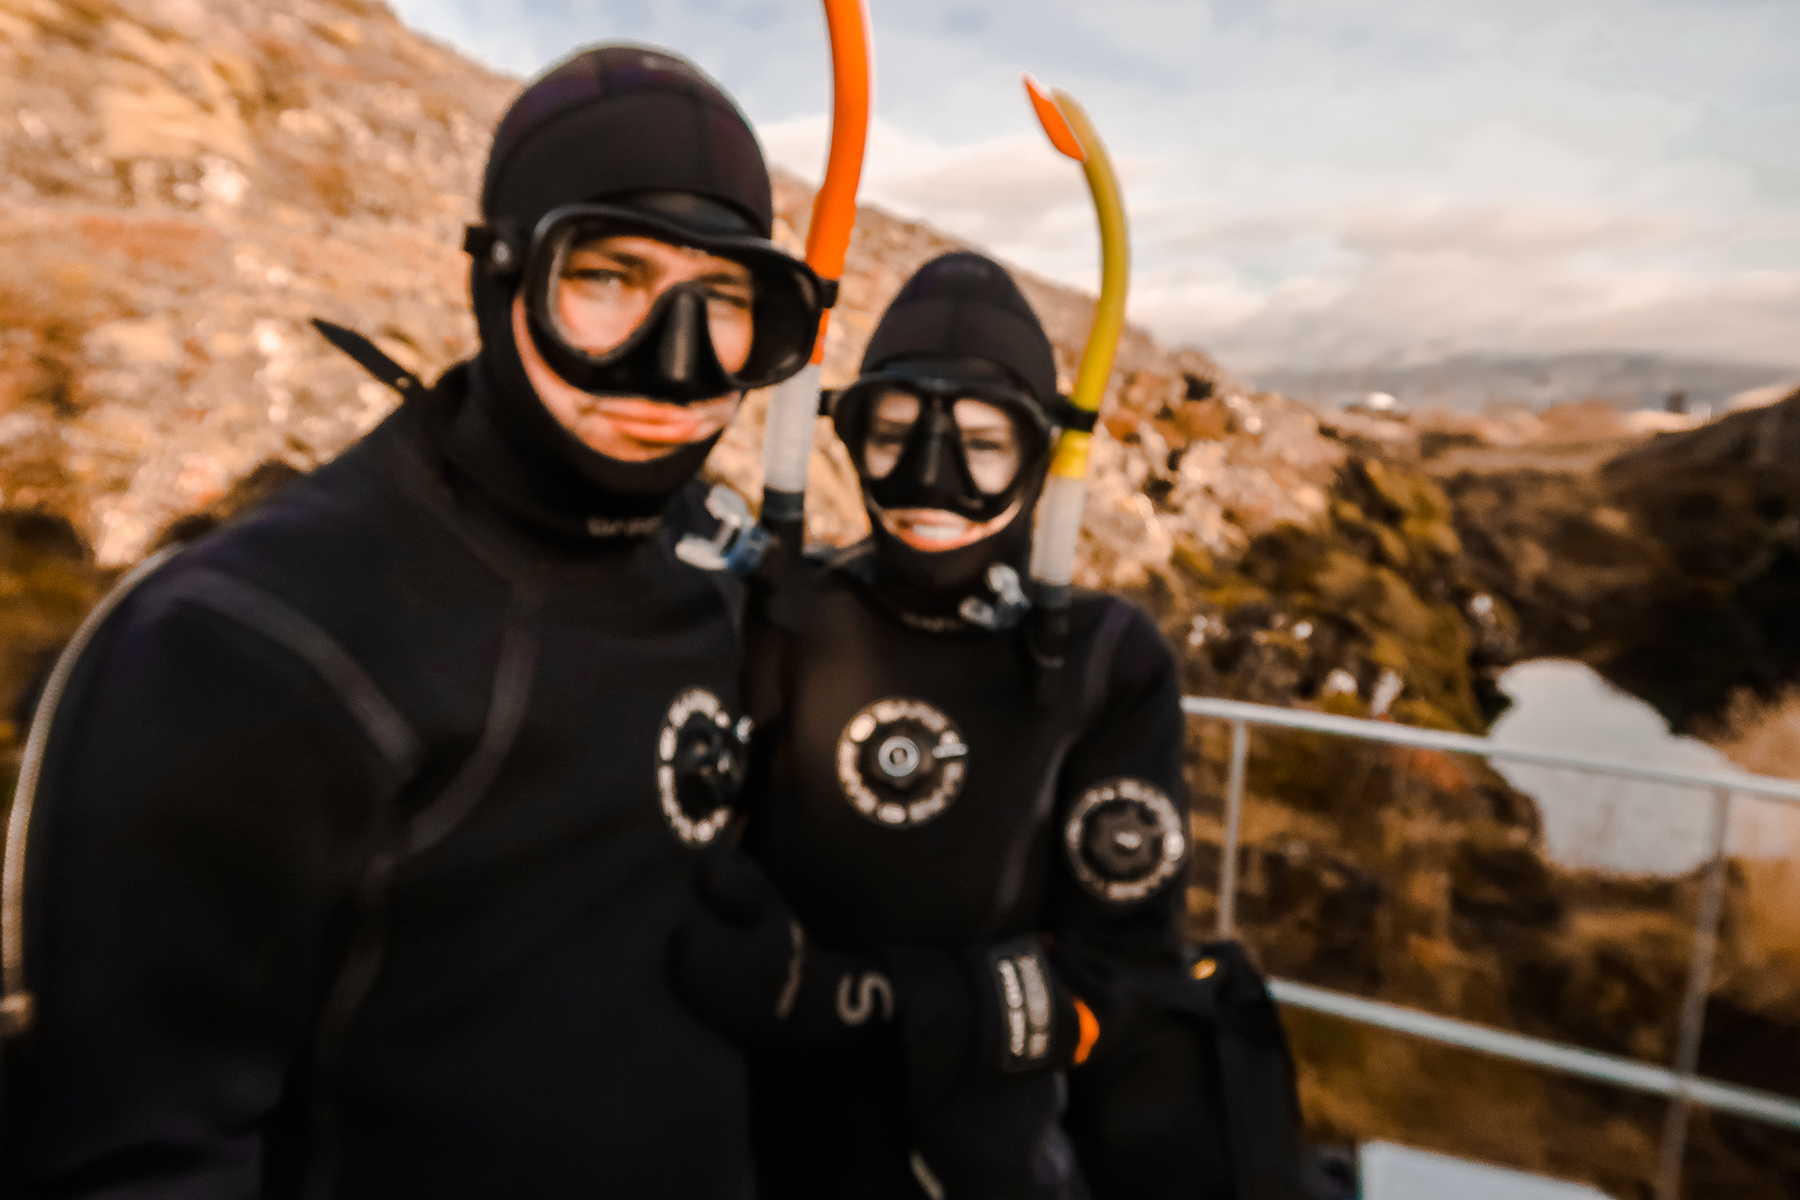 Alyssa Campanella and Torrance Coombs of The A List experience snorkeling Silfra with DIVE.IS in Iceland